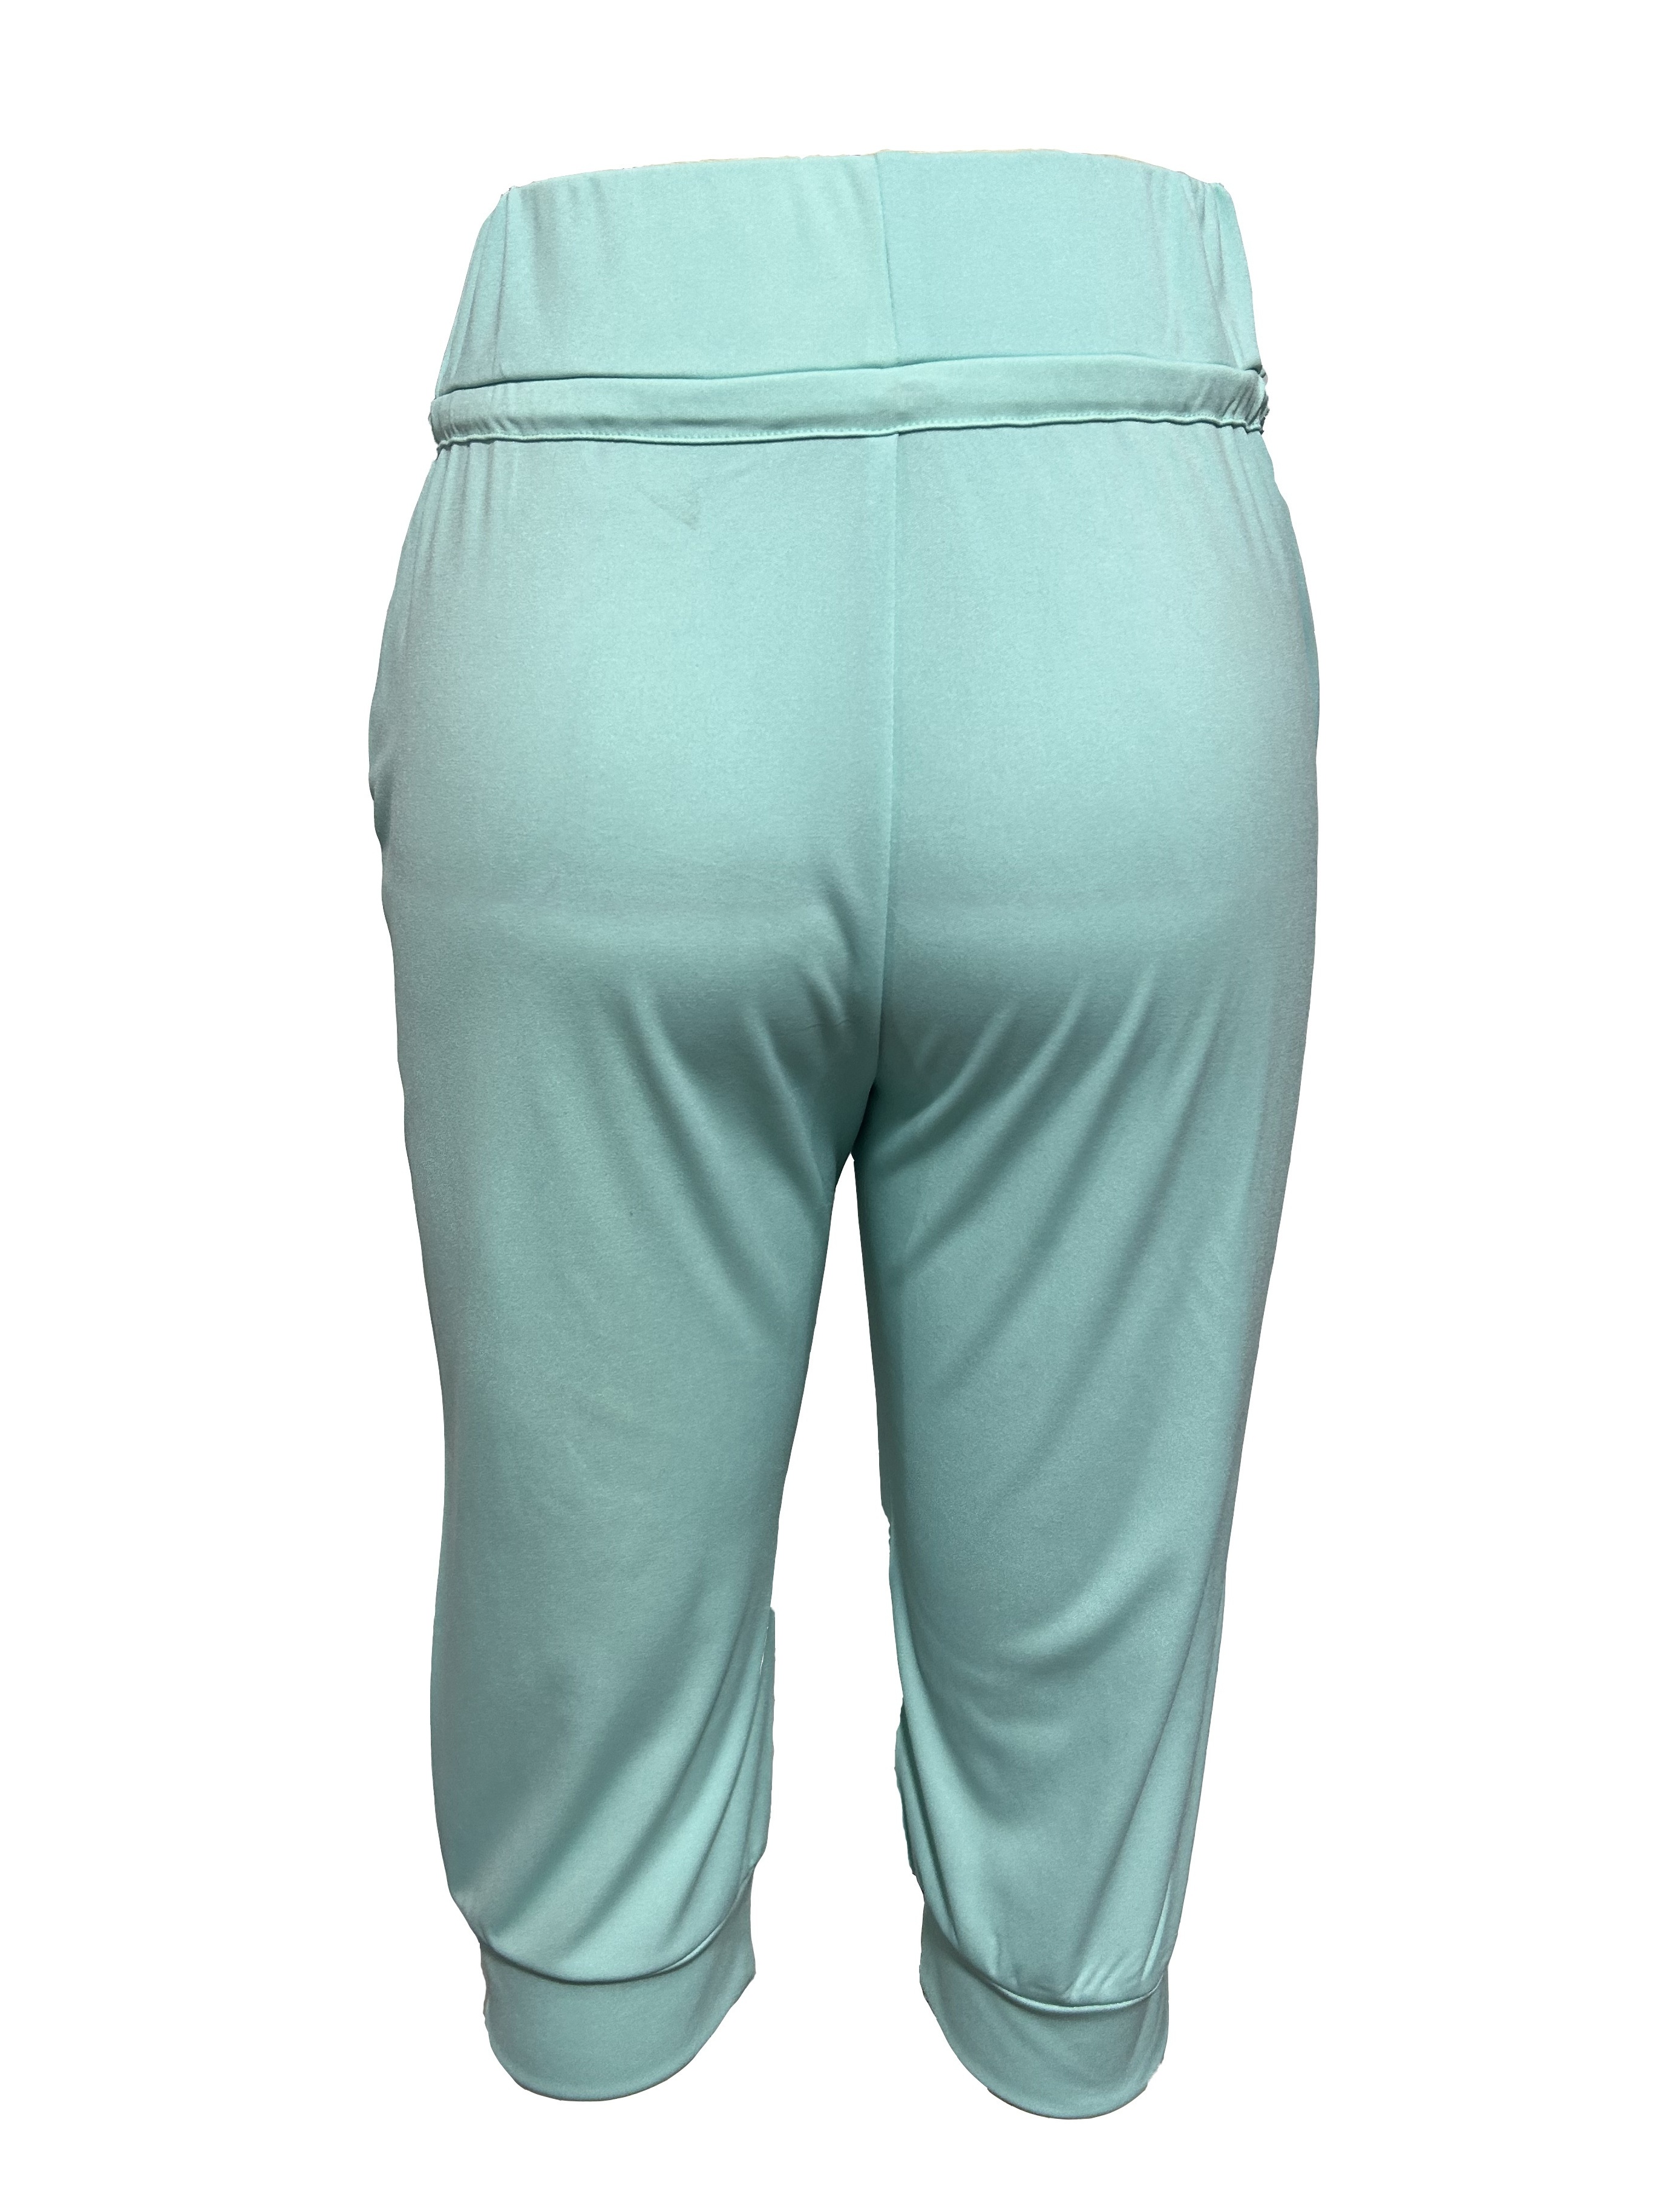 Discover Cotton Knit Capri Pants for Unmatched Comfort - China